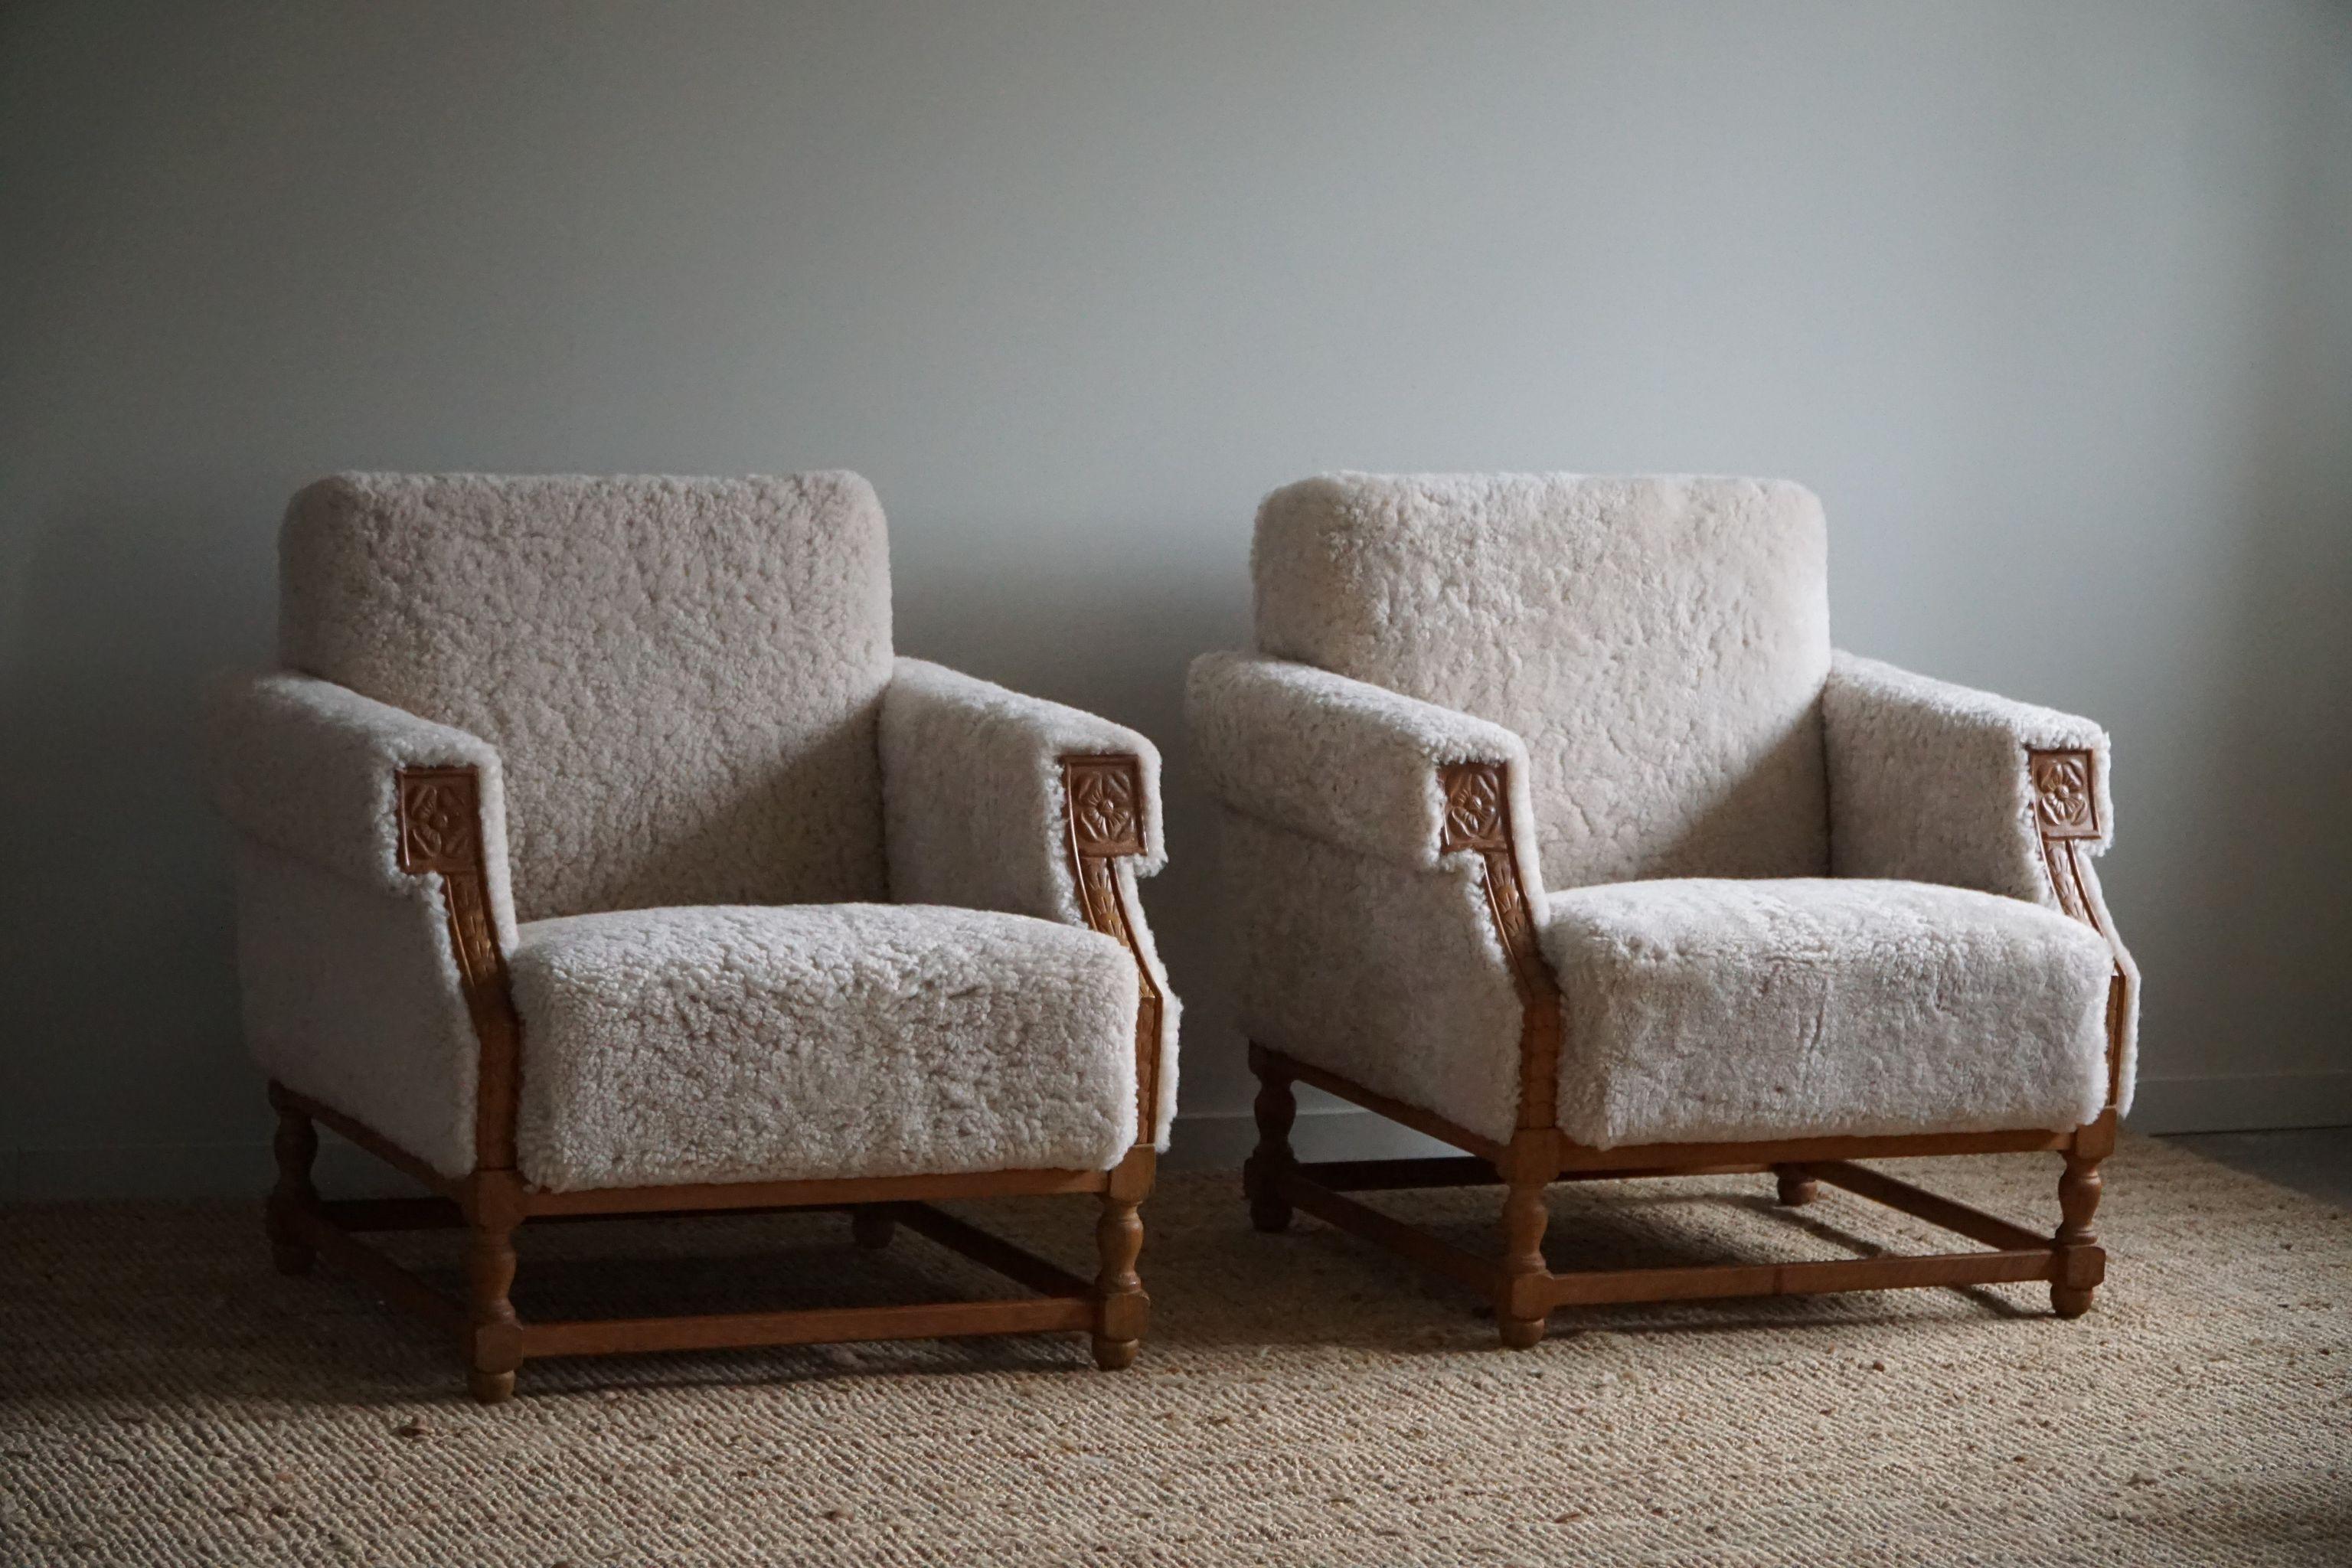 Pair of Danish Mid-Century Modern Lounge Chairs in Shearling Lambswool, 1950s 9